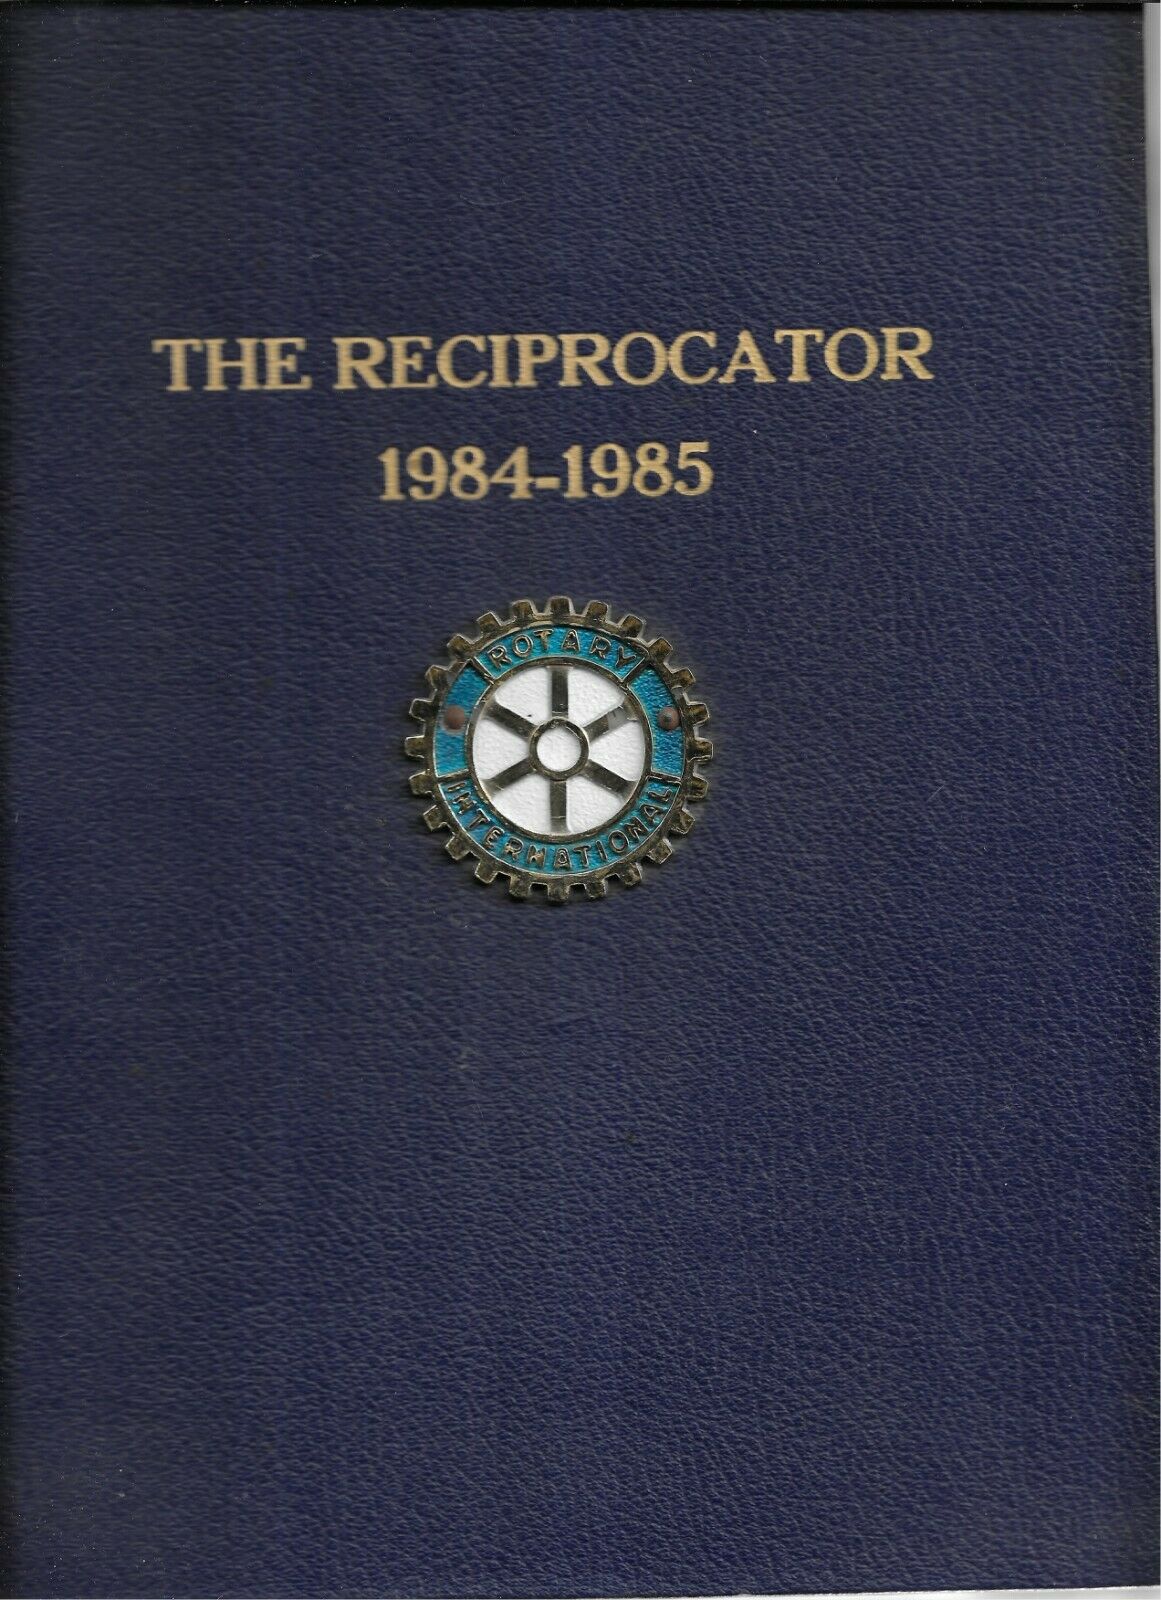 Rotary International Bound Volume Of 49 Issues Of The Reciprocartor, 1984-85